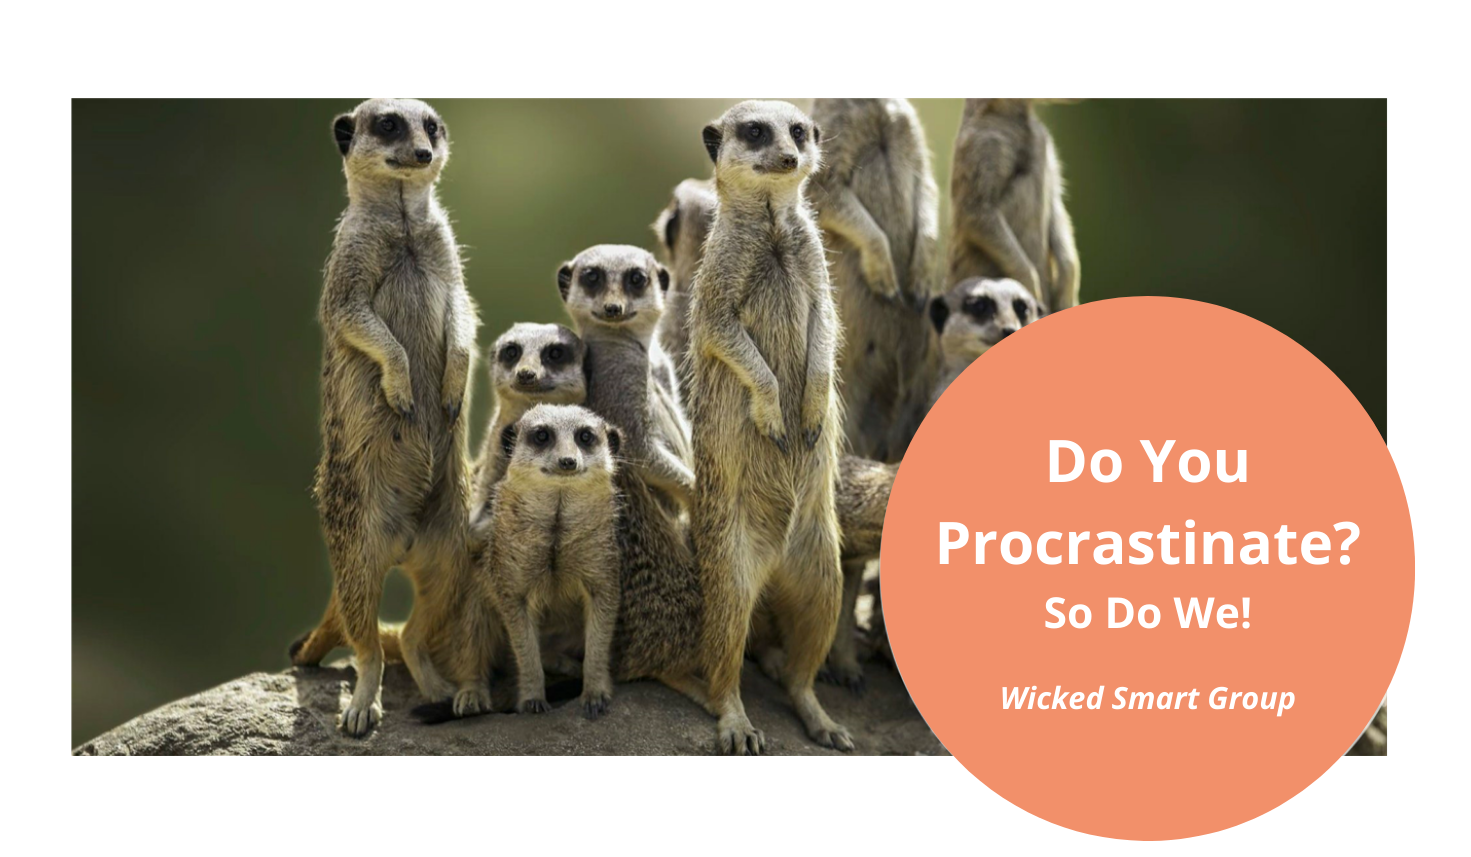 do-you-procrastinate-so-do-we-wicked-smart-group-image-for-website.png